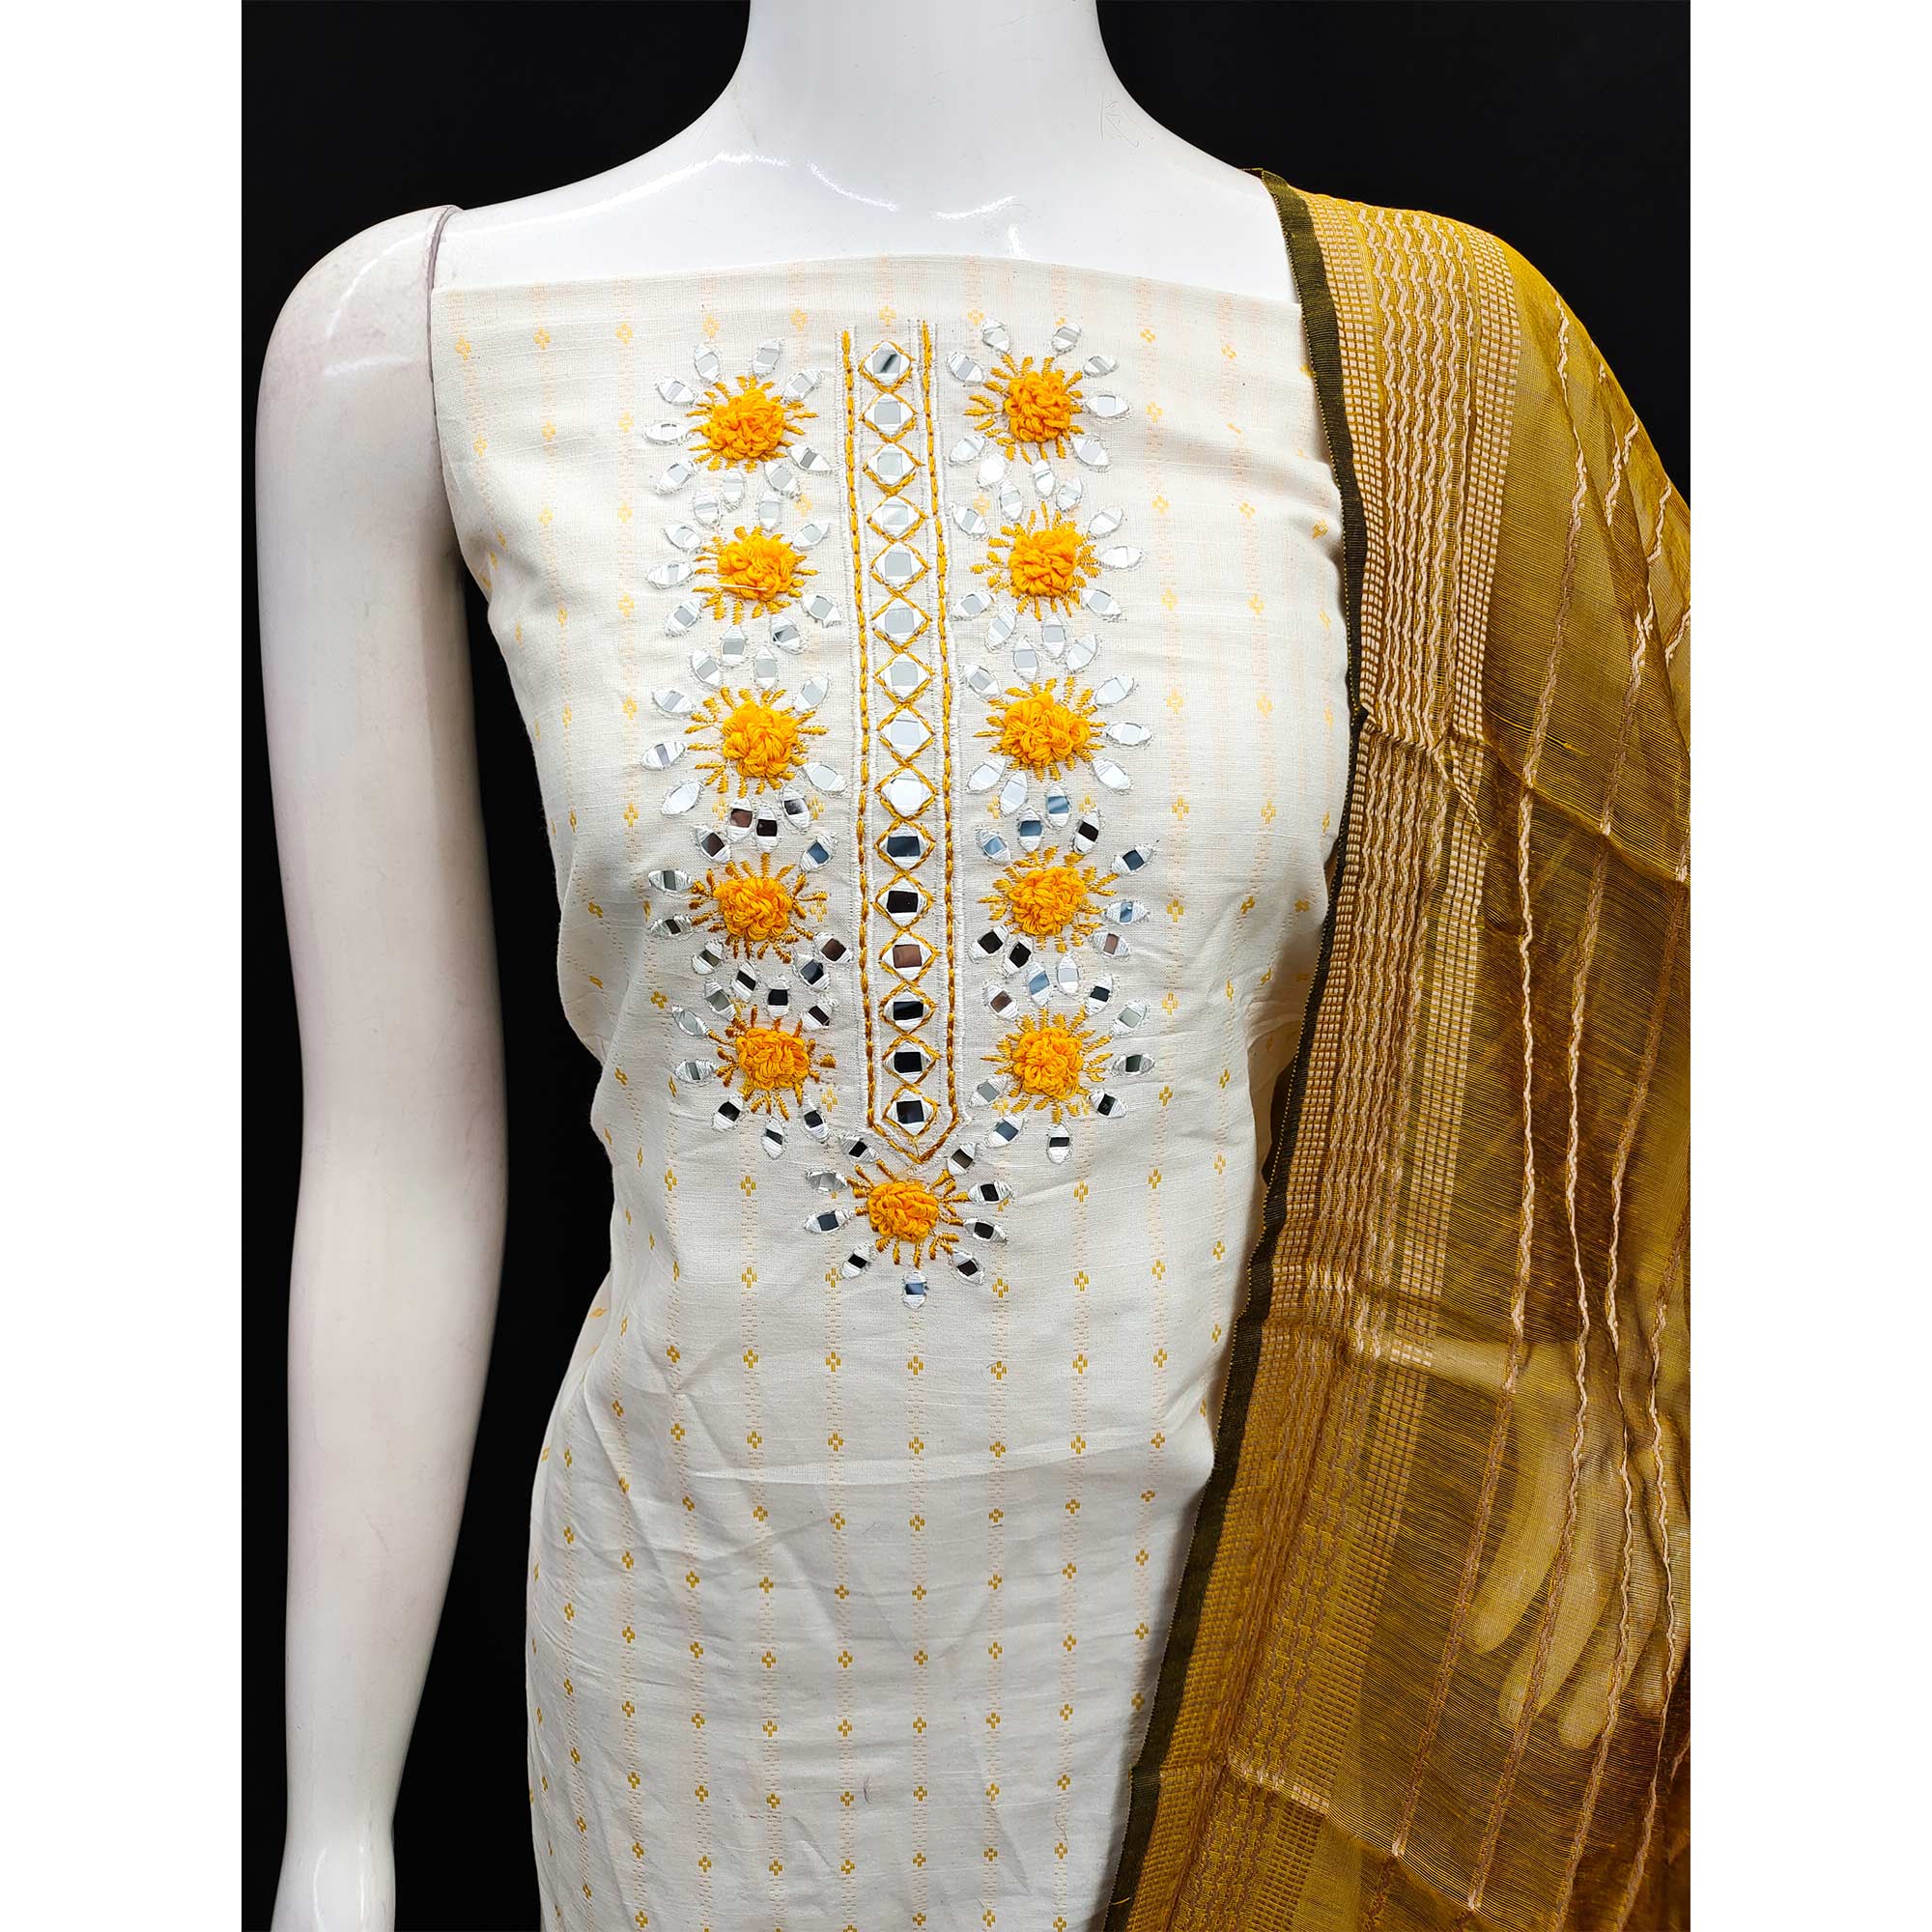 White & Mustard Floral Woven Pure Cotton Dress Material